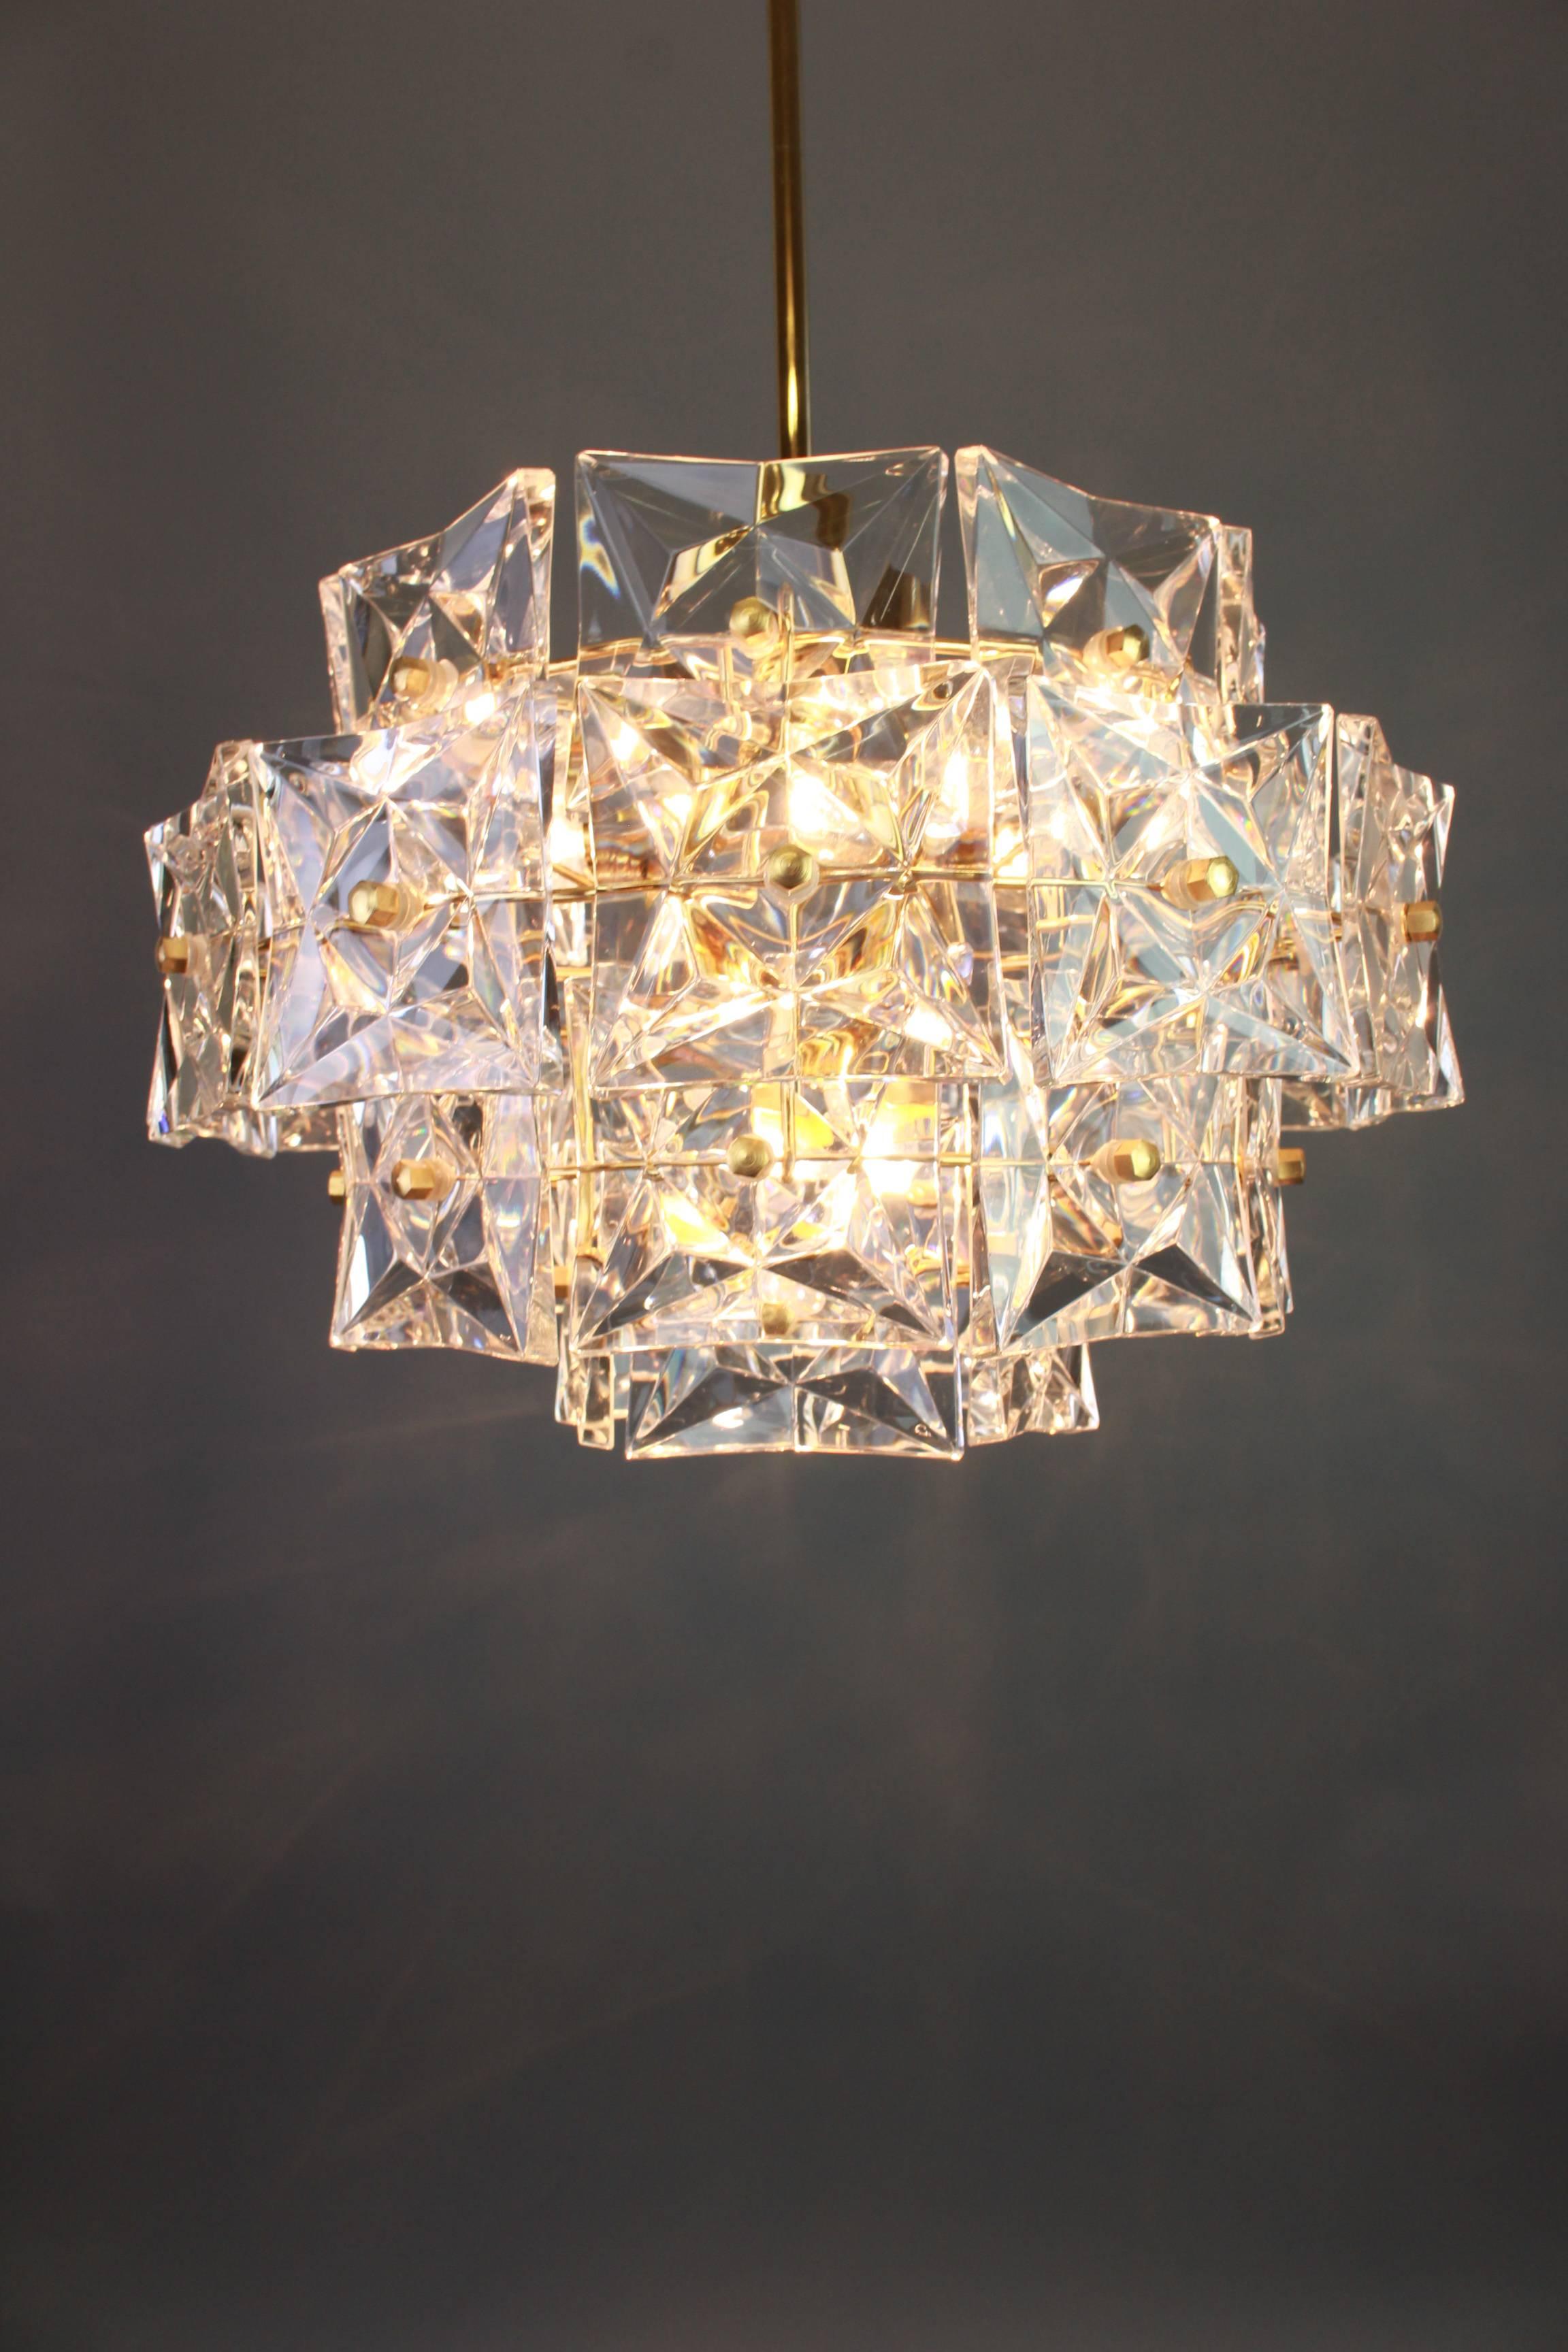 A stunning four-tier chandelier by Kinkeldey, Germany, manufactured in circa 1970-1979. A handmade and high quality piece. The ceiling fixture and the frame are made of brass and has four rings with lots of facetted crystal glass elements.

Sockets: